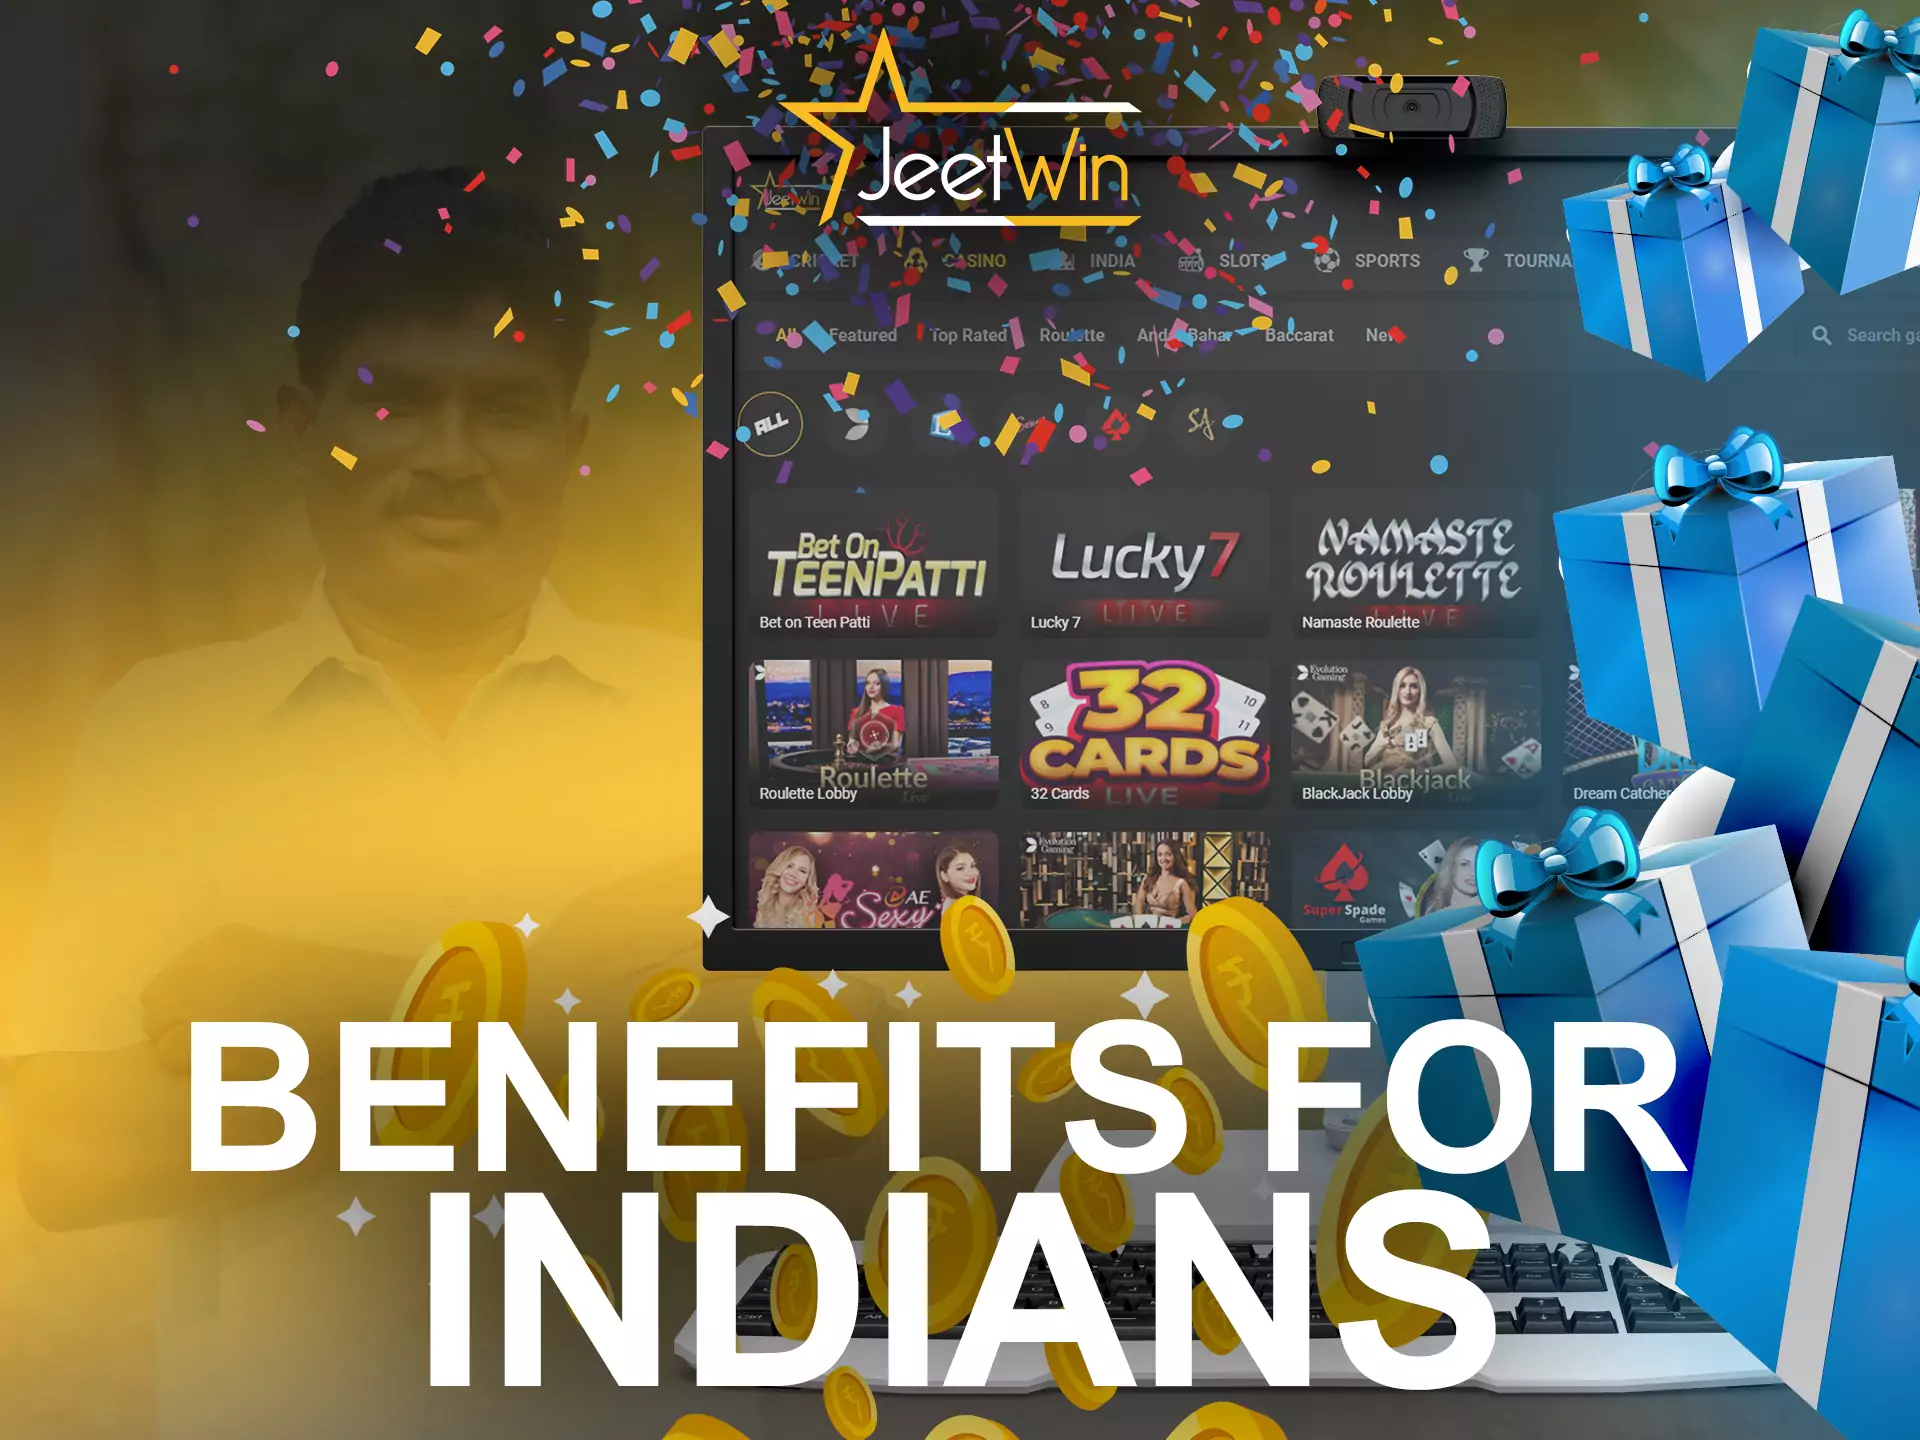 Learn about all the benefits of JeetWin for Indian users.